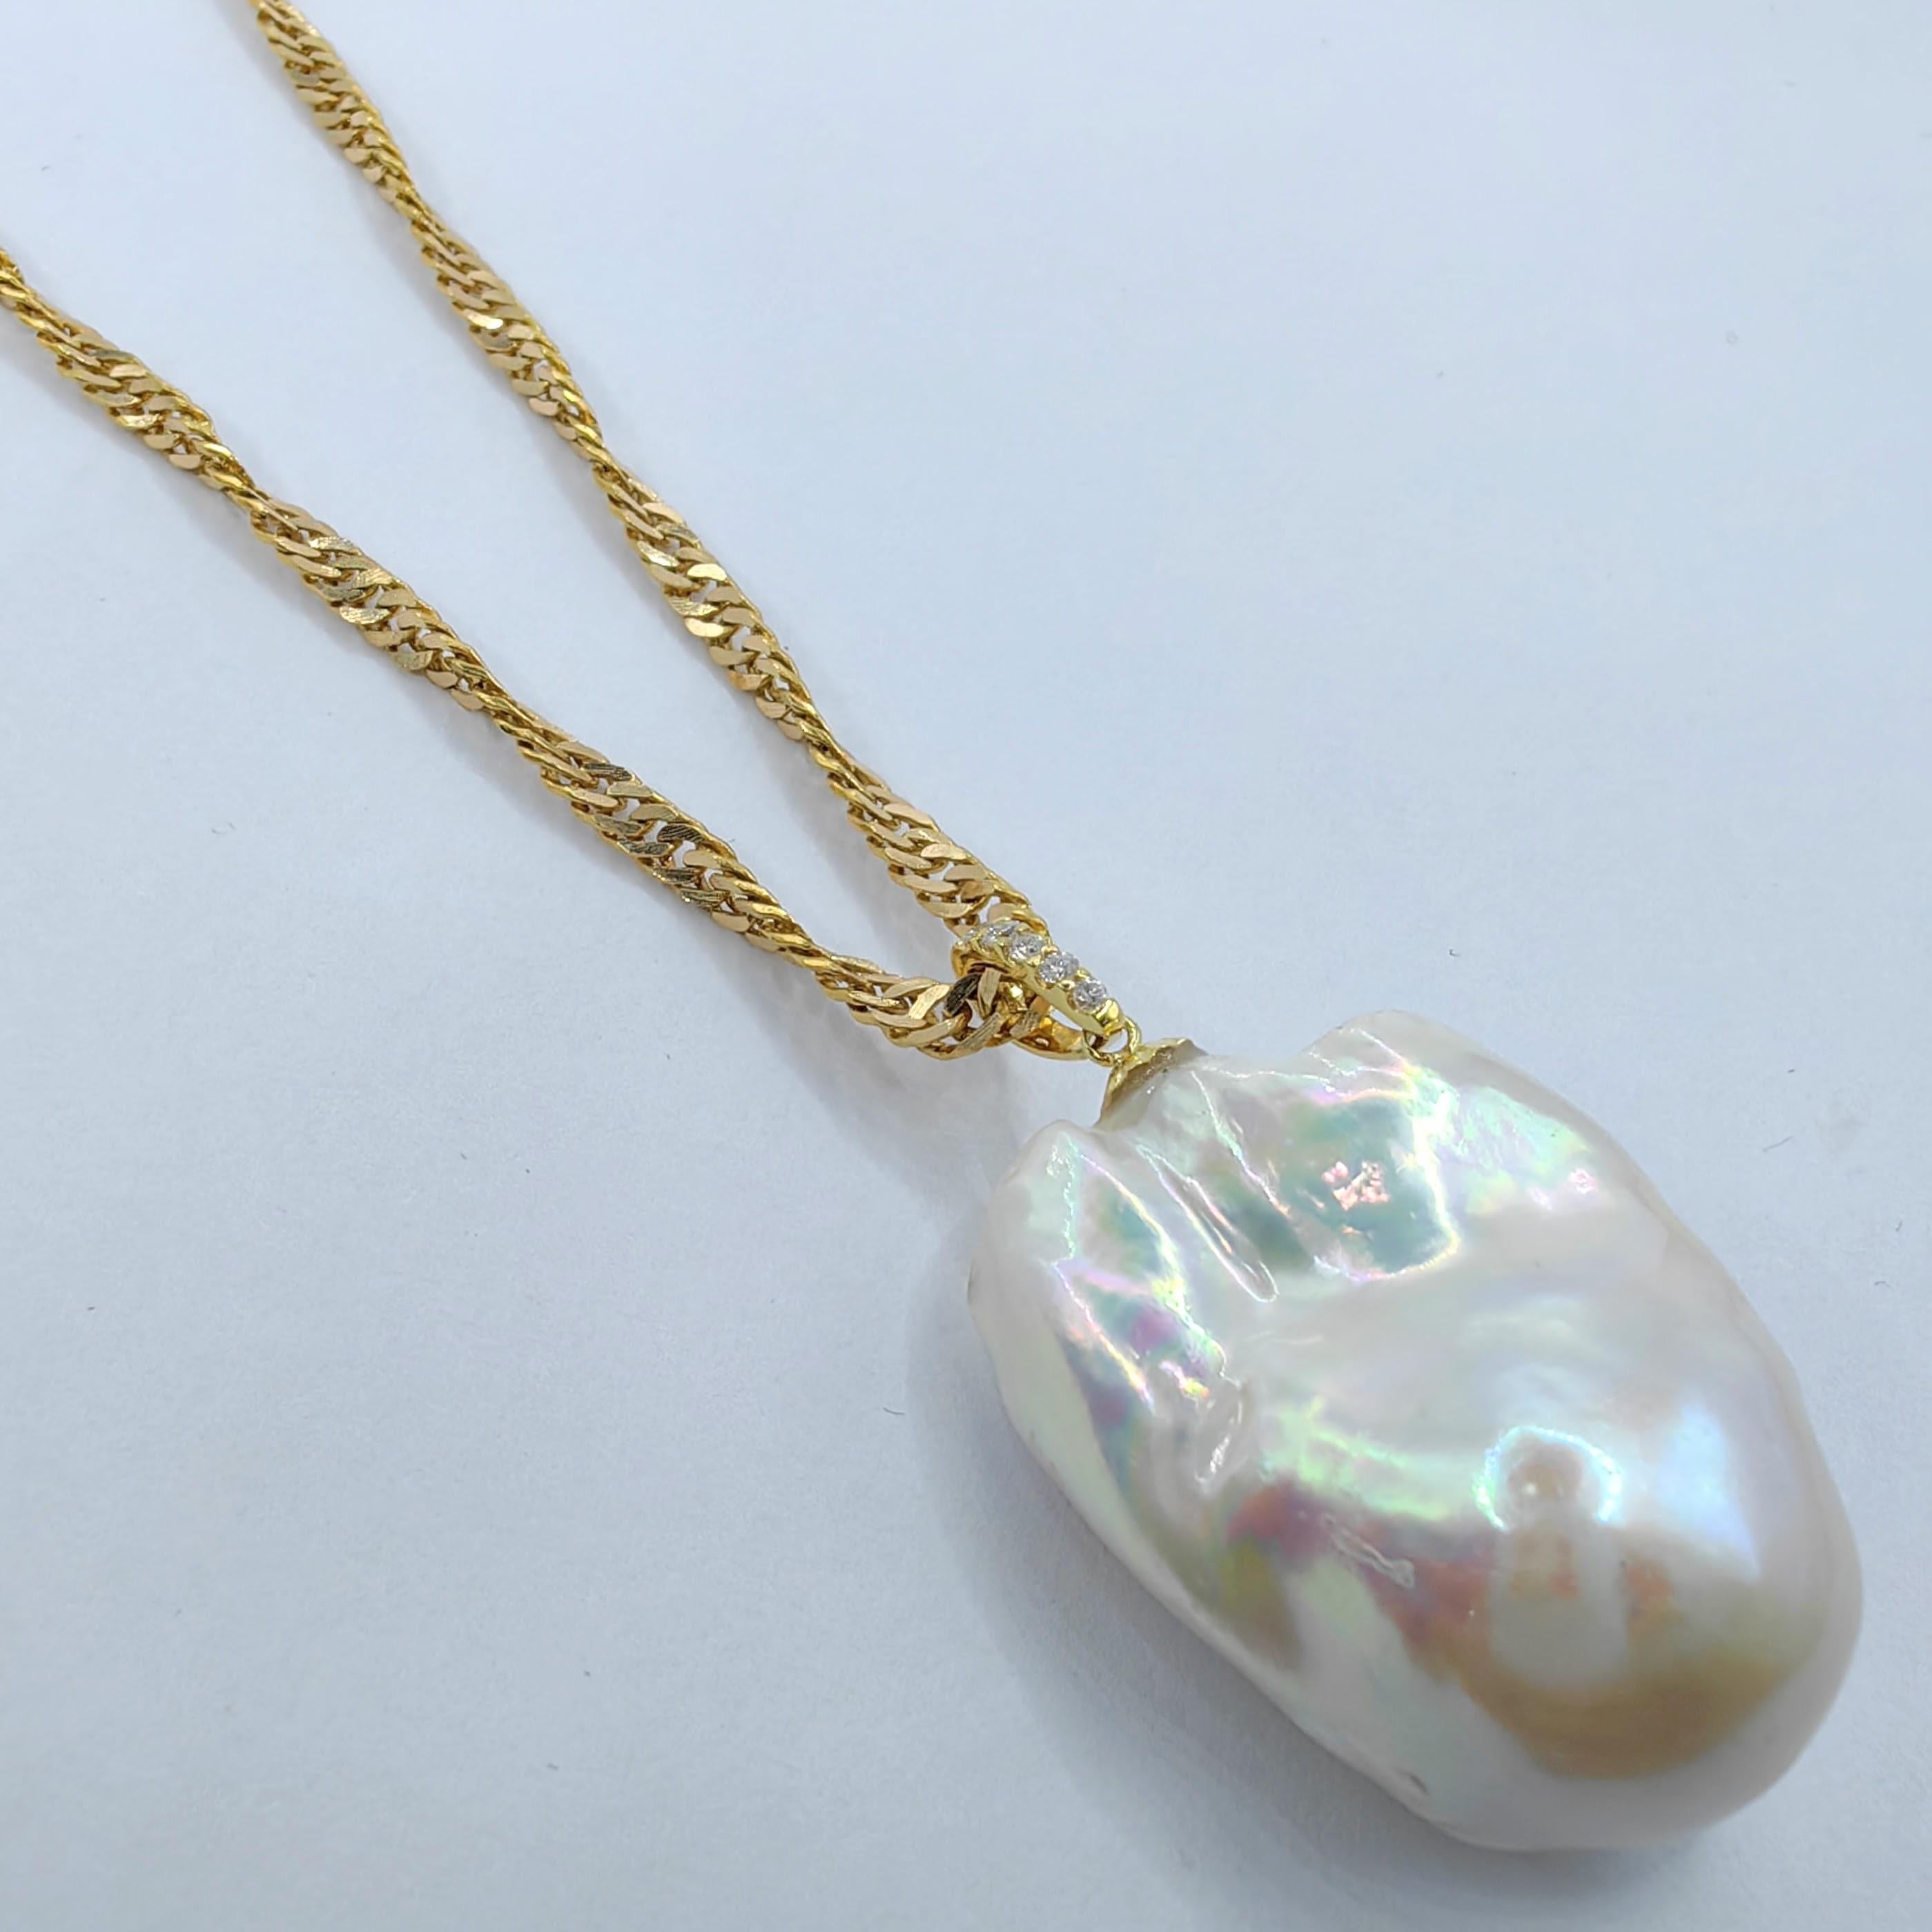 Introducing our mesmerizing 49.24ct Iridescent Baroque Pearl Diamond Pendant, accompanied by a 22K Twisted Chain Necklace in Yellow Gold. This extraordinary pendant features an extra-large Freshwater Baroque Pearl, boasting an impressive weight of